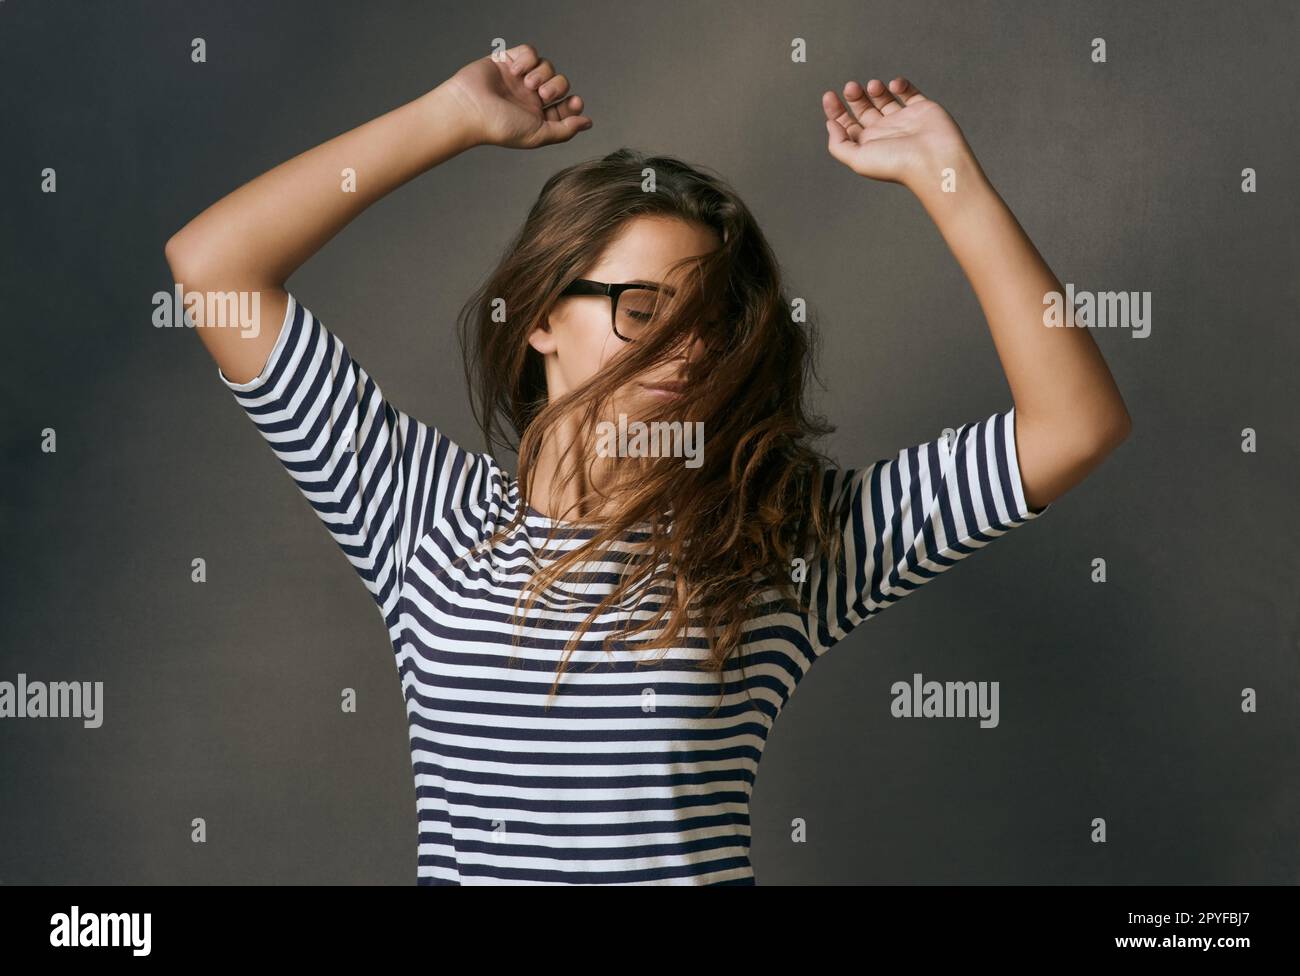 Today I choose joy. Studio shot of a young woman dancing against a dark background. Stock Photo